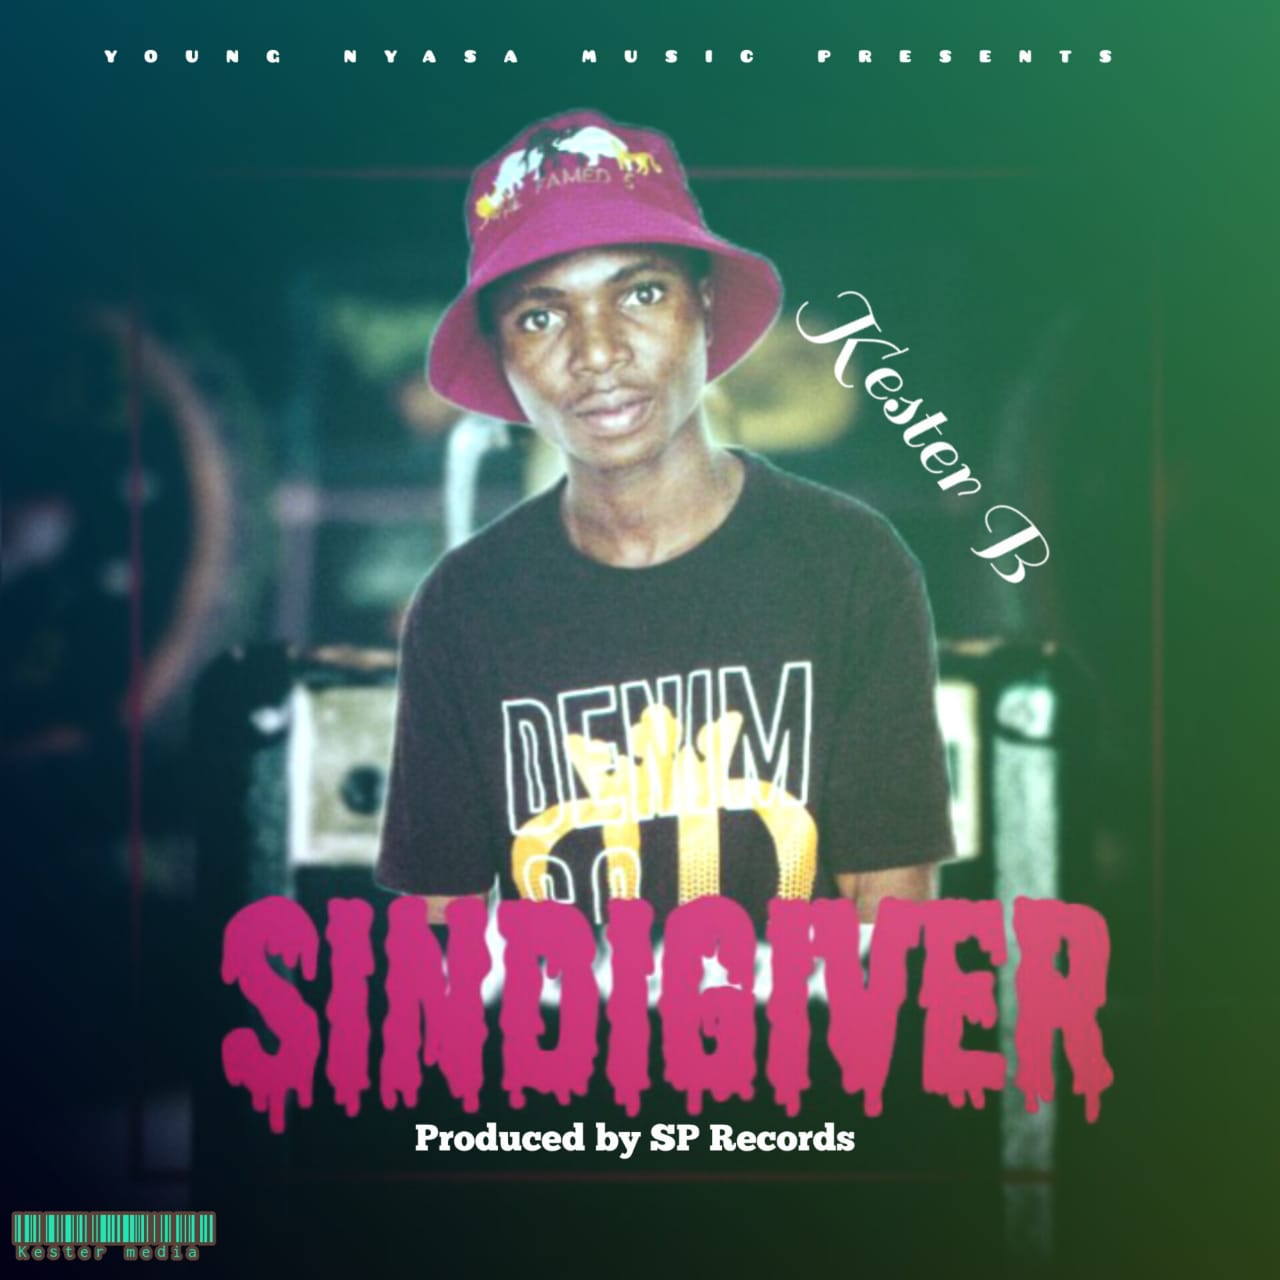 KesterB_Sindigiver_prod-by-sp-records